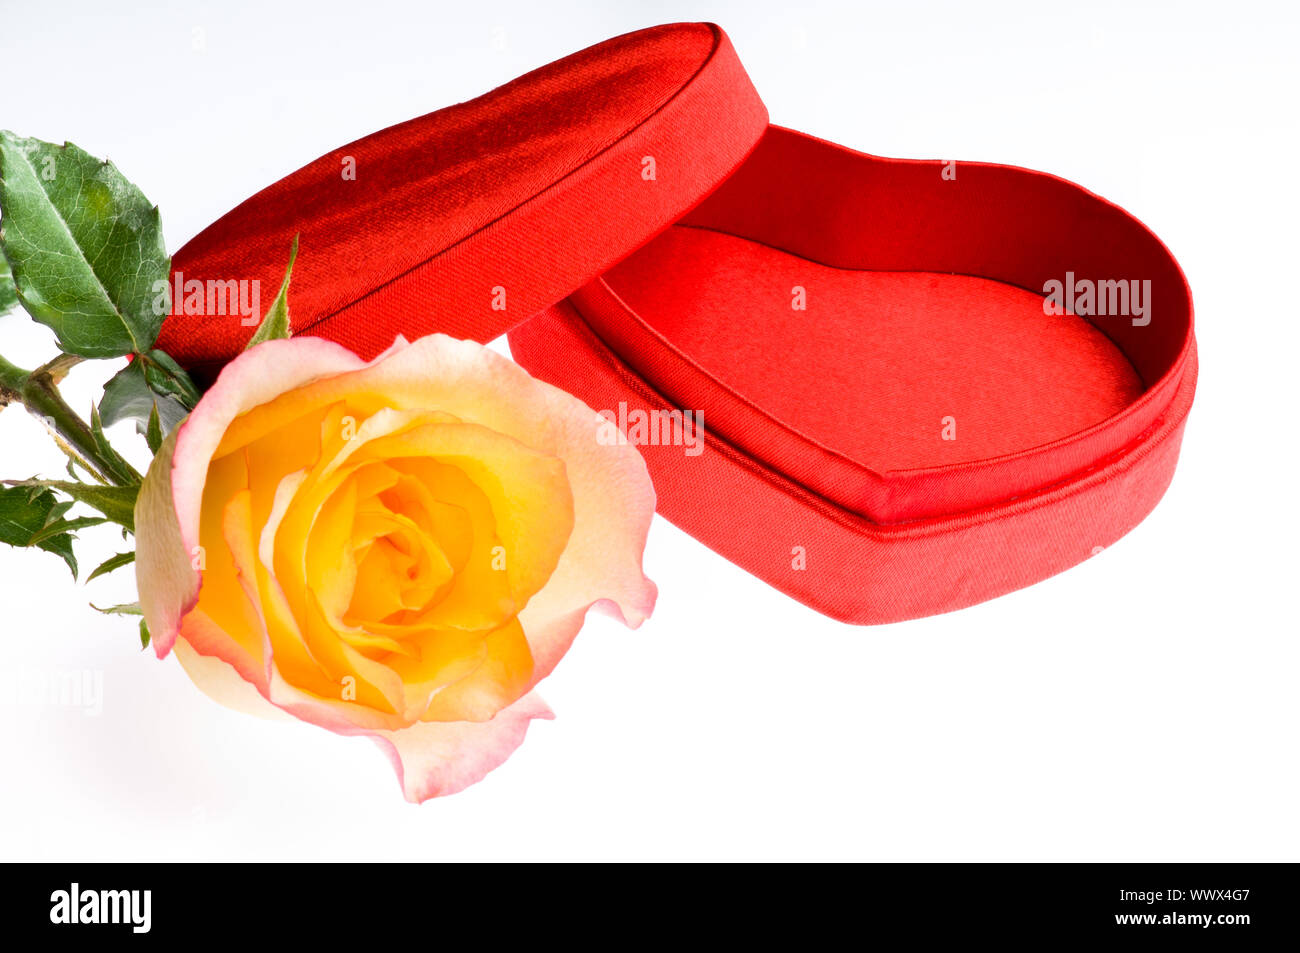 Red yellow rose and a heart shape box Stock Photo